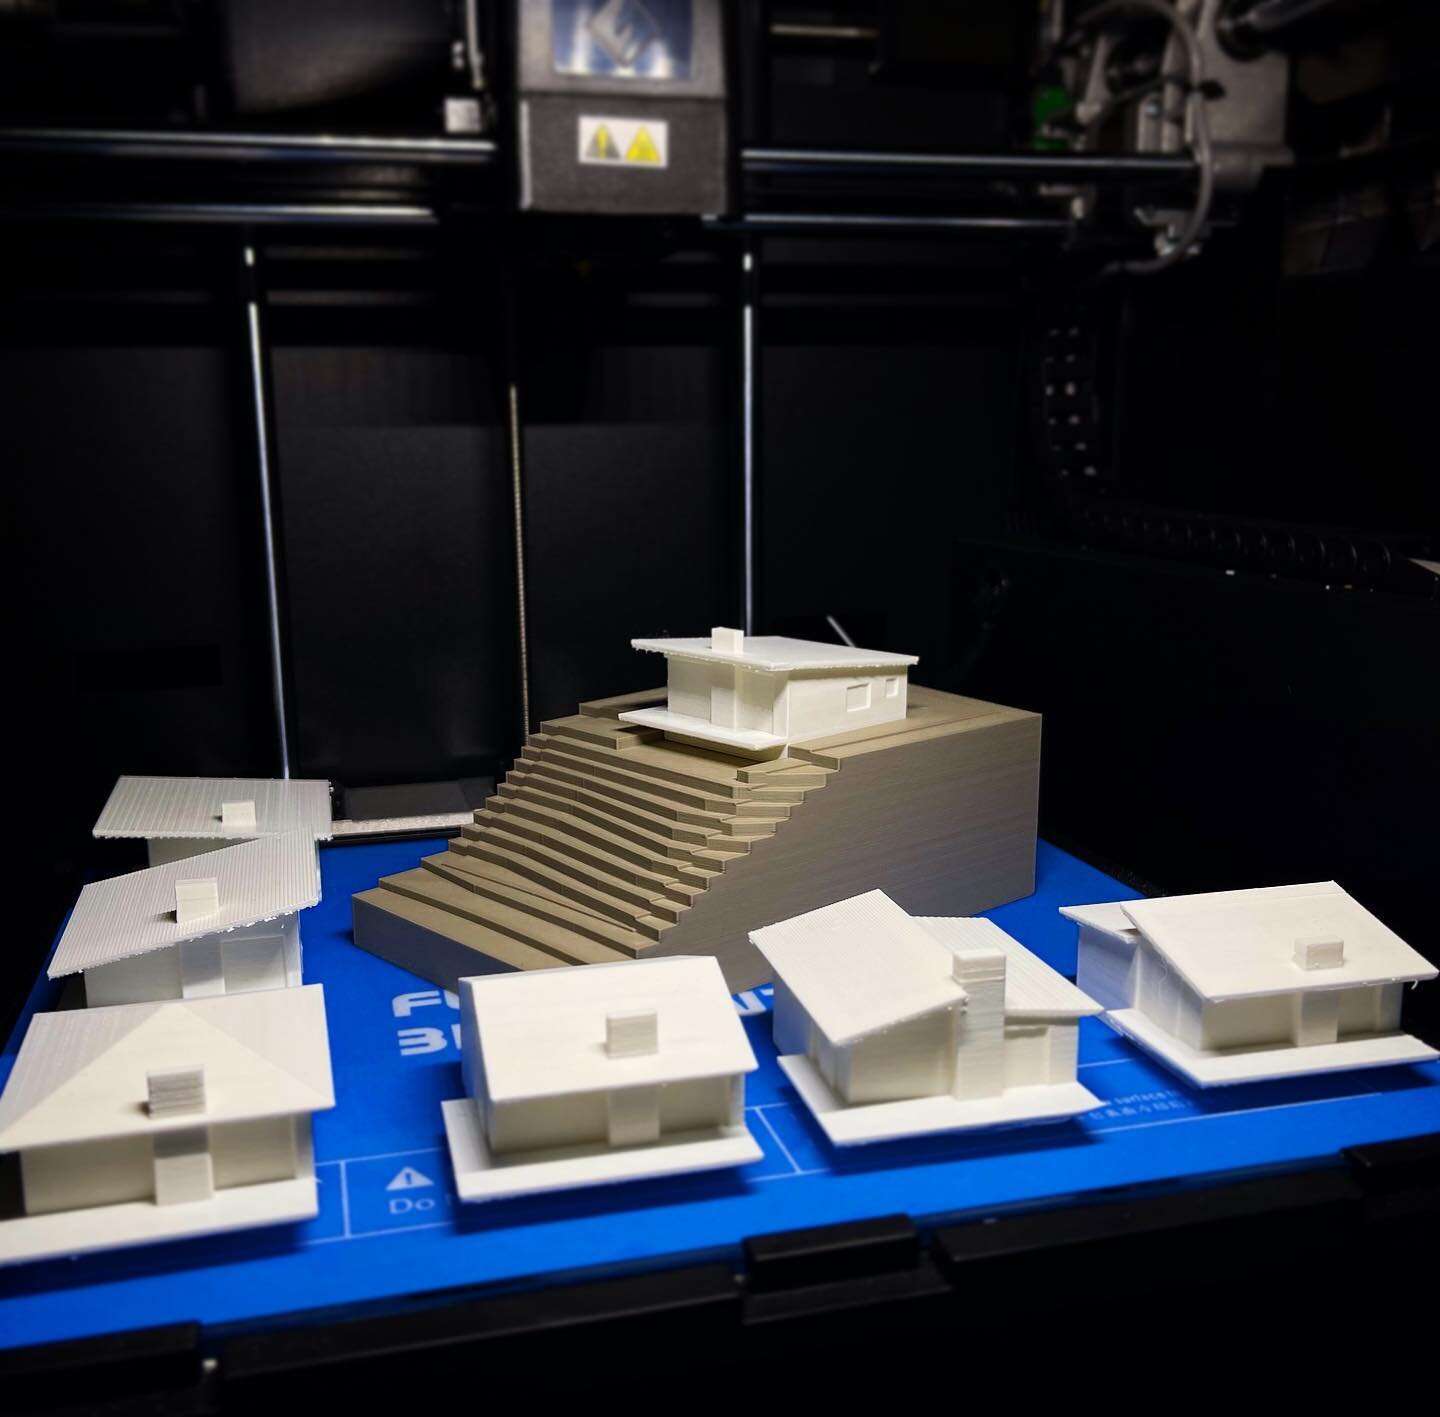 Our office is continually testing the capabilities of our 3D printer as we work to discover new ways for it to benefit our daily design process. Being able to print multiple design concepts with the site model allows us to plug and play different opt